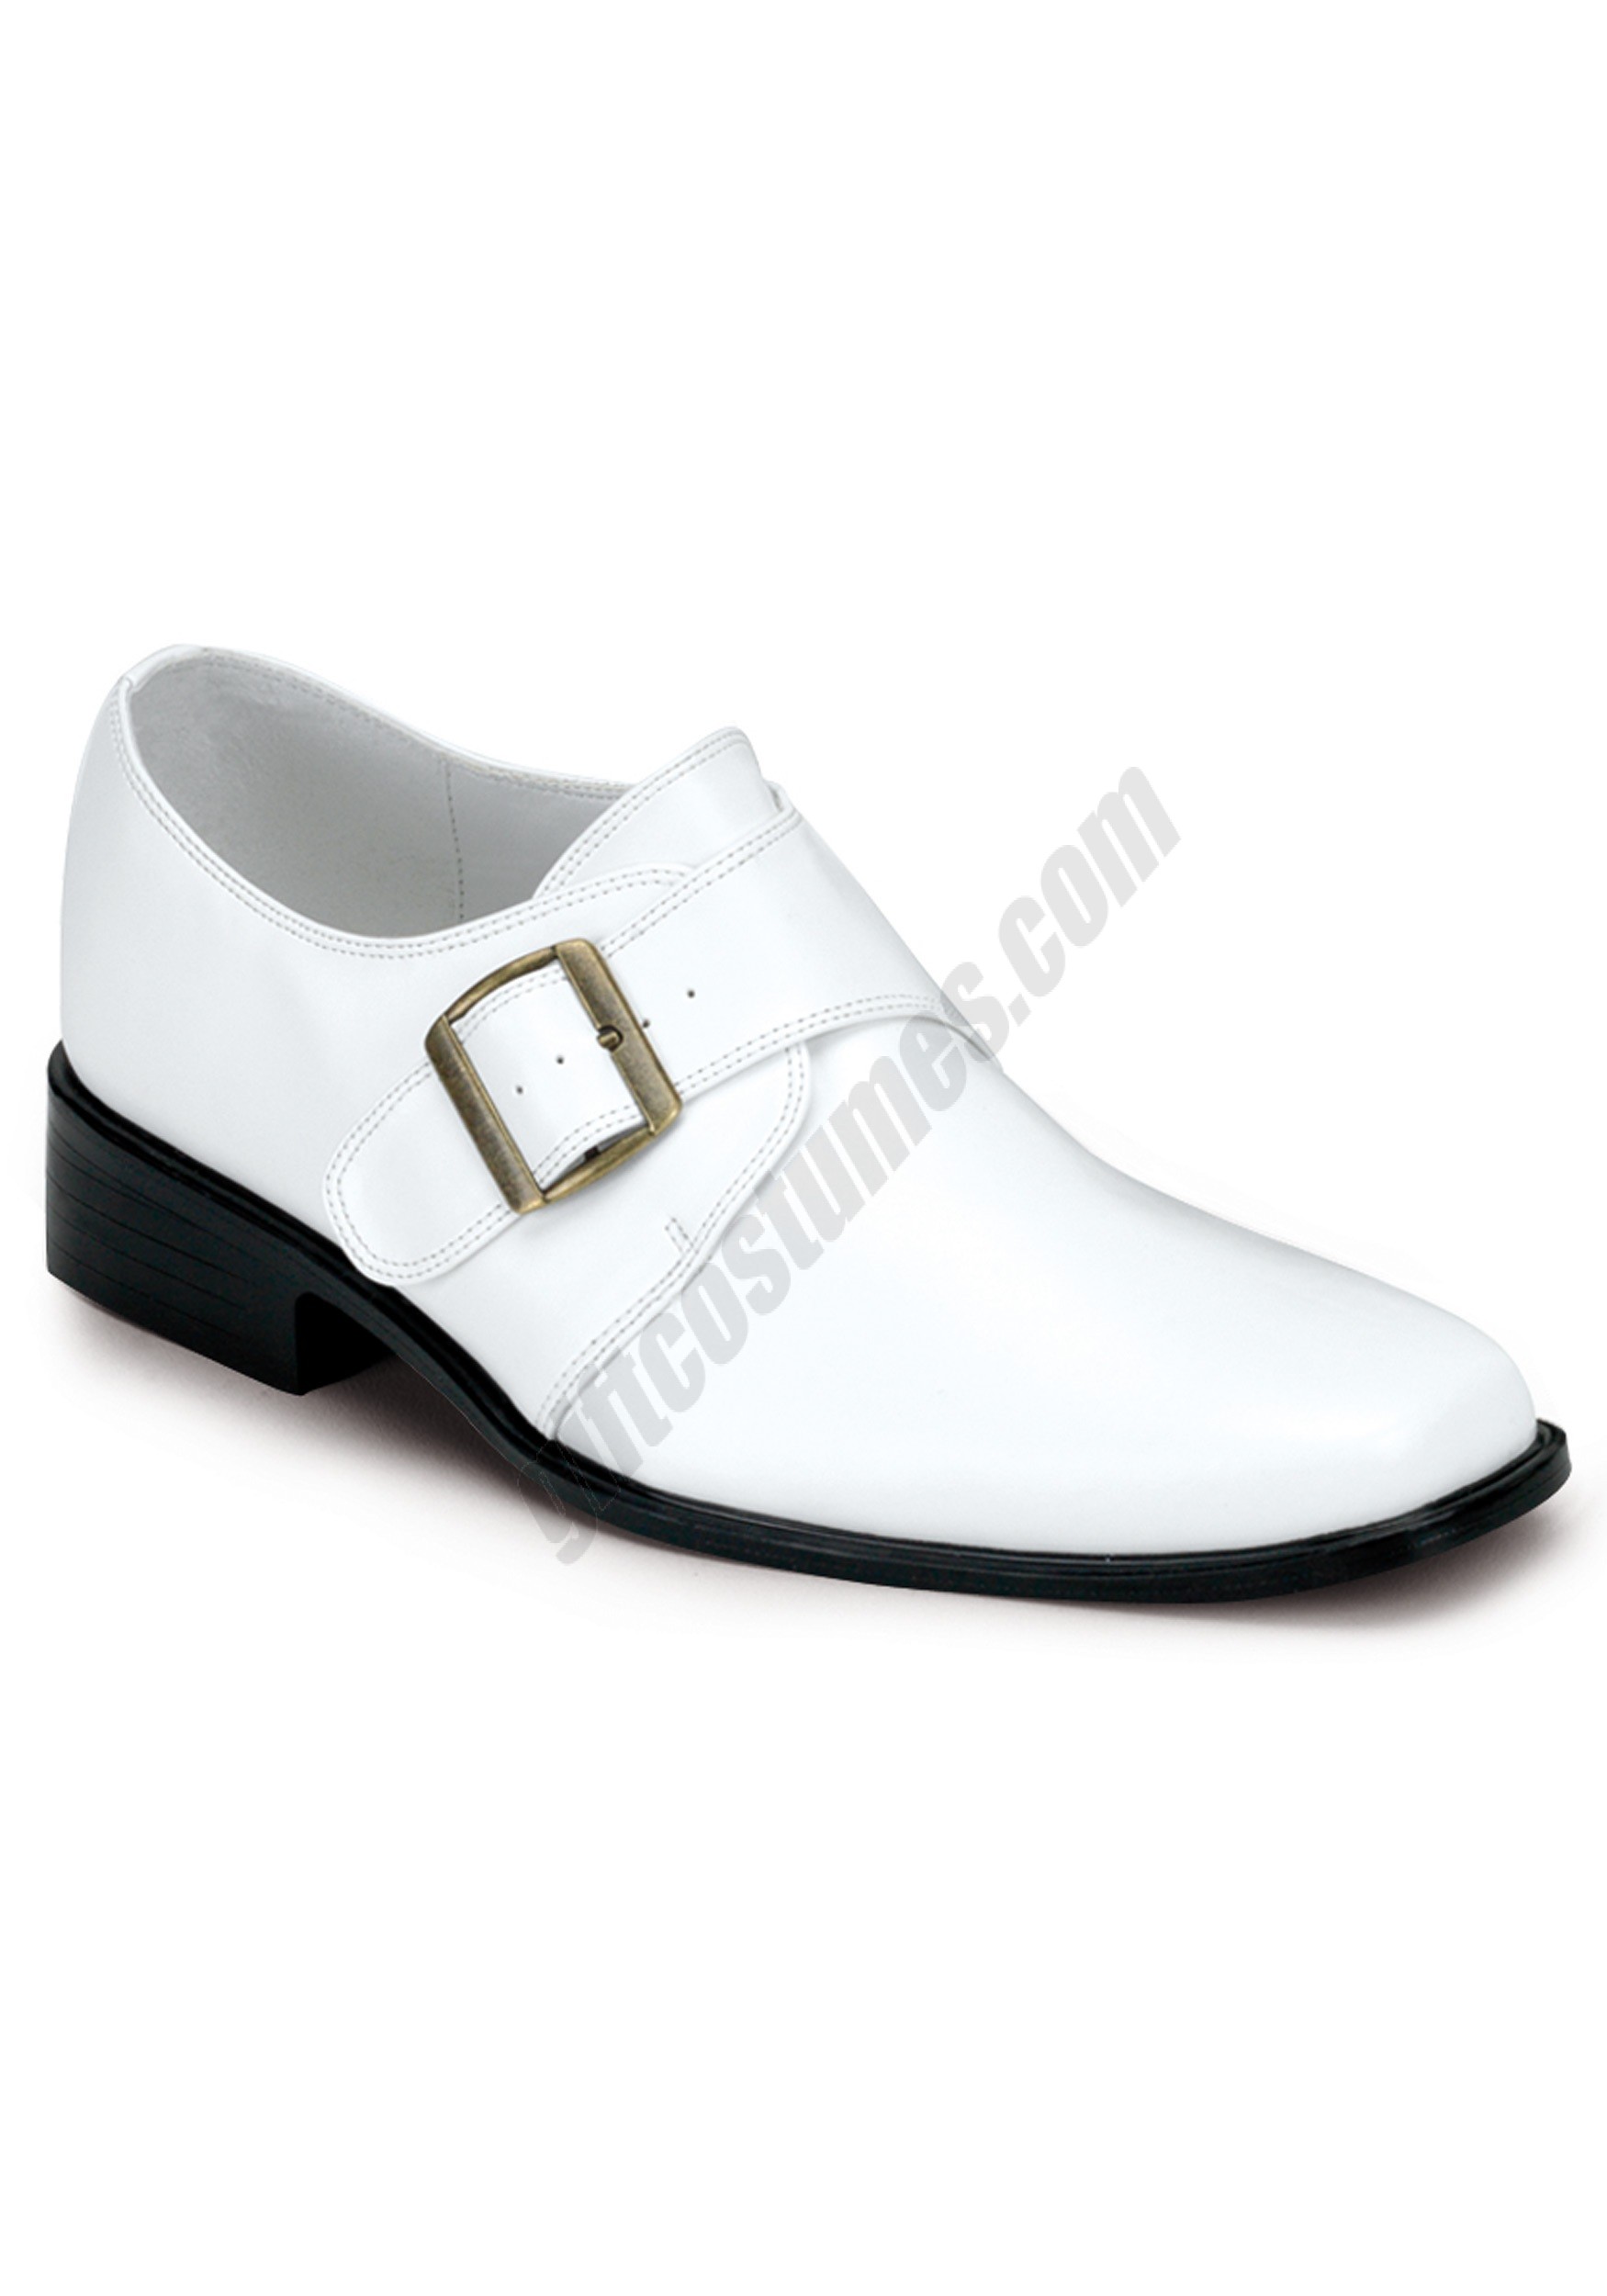 Mens Disco Loafers Promotions - Mens Disco Loafers Promotions